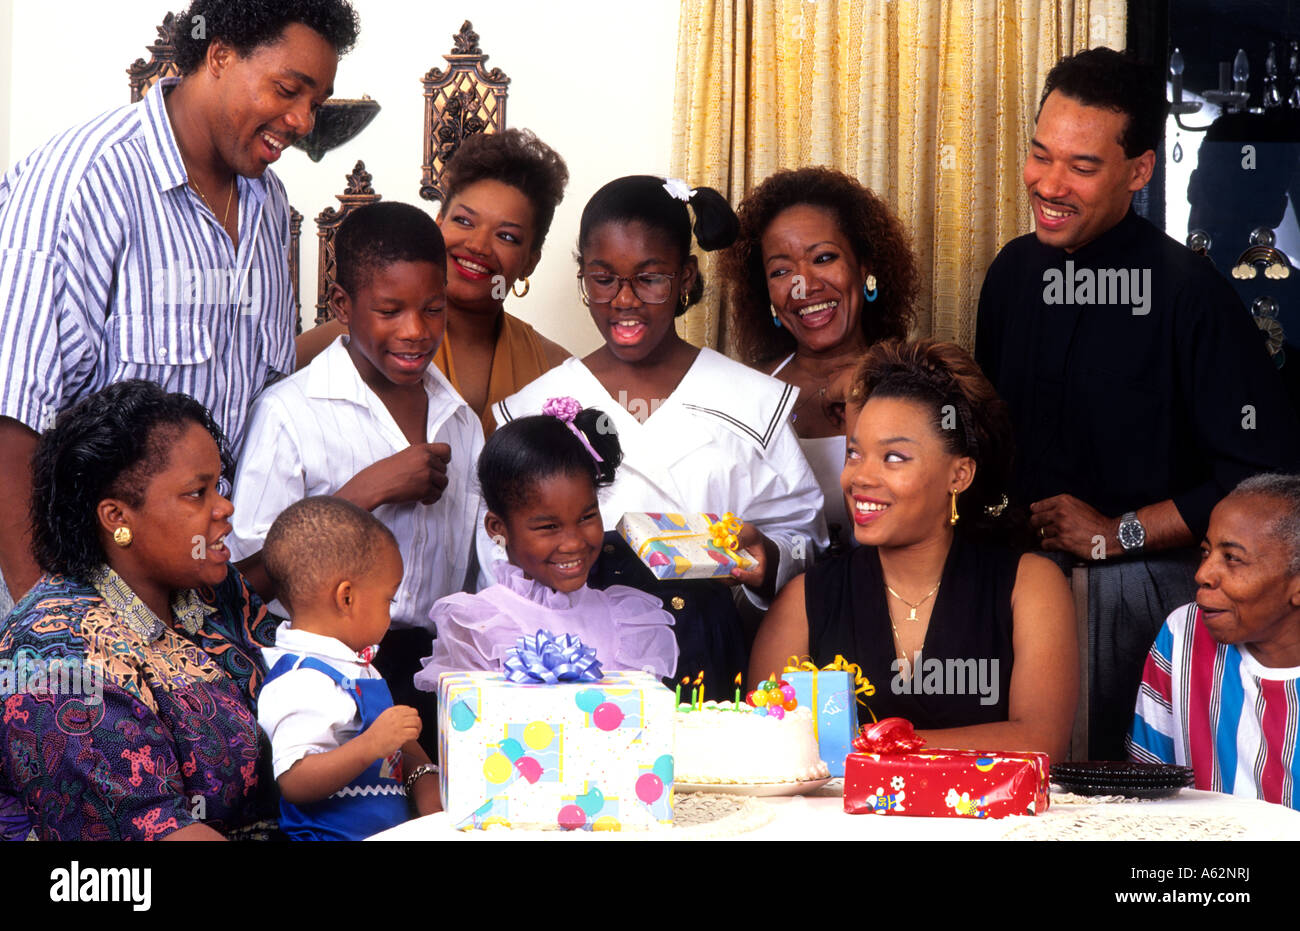 Large four generation family celebrating birthday party at home together  with loving caring around table with presents singing Stock Photo - Alamy